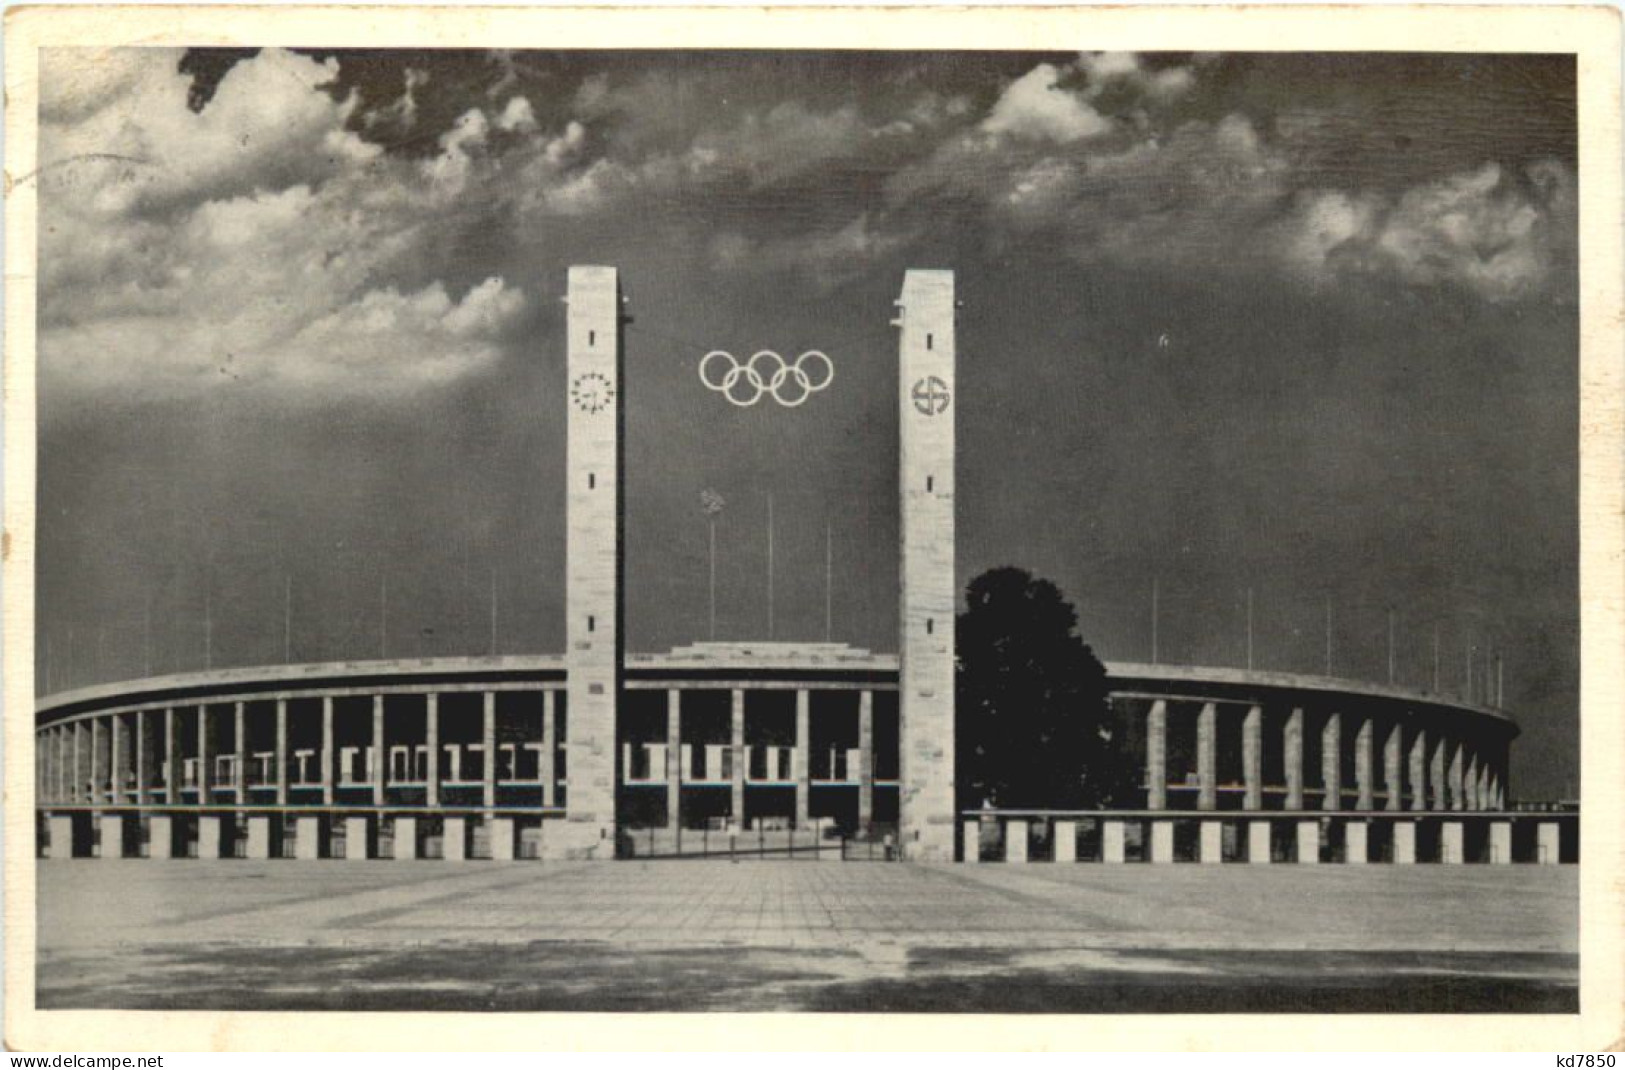 Olympische Spiele 1936 Berlin - Olympic Games